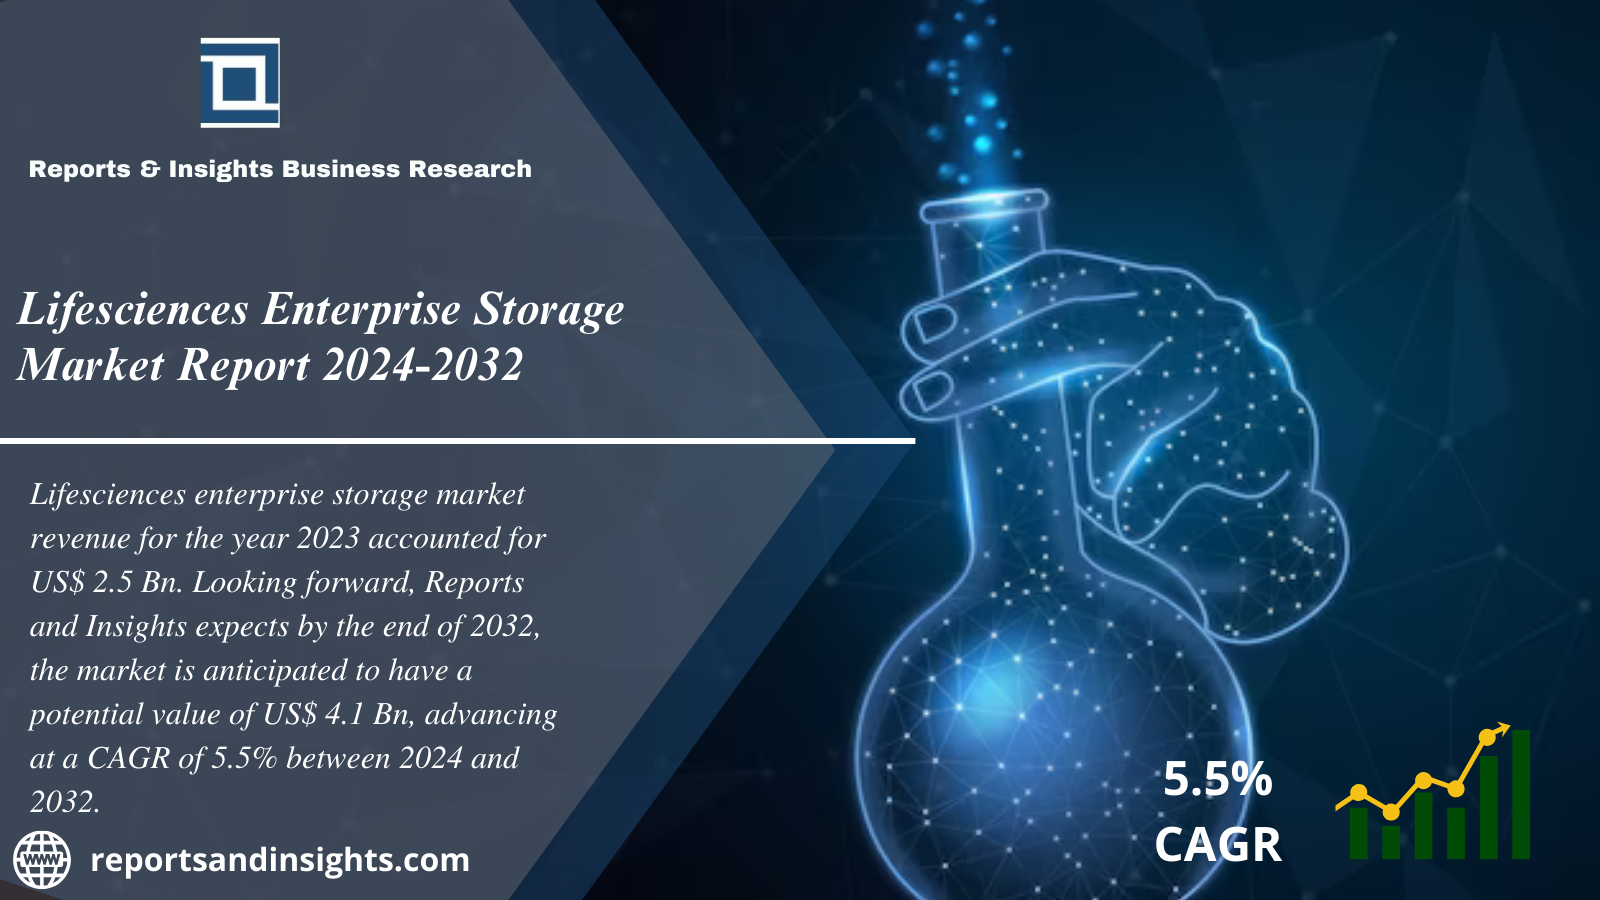 Lifesciences Enterprise Storage Market Size, Share, Growth, Trends, Demand and Research Report 2024 to 2032